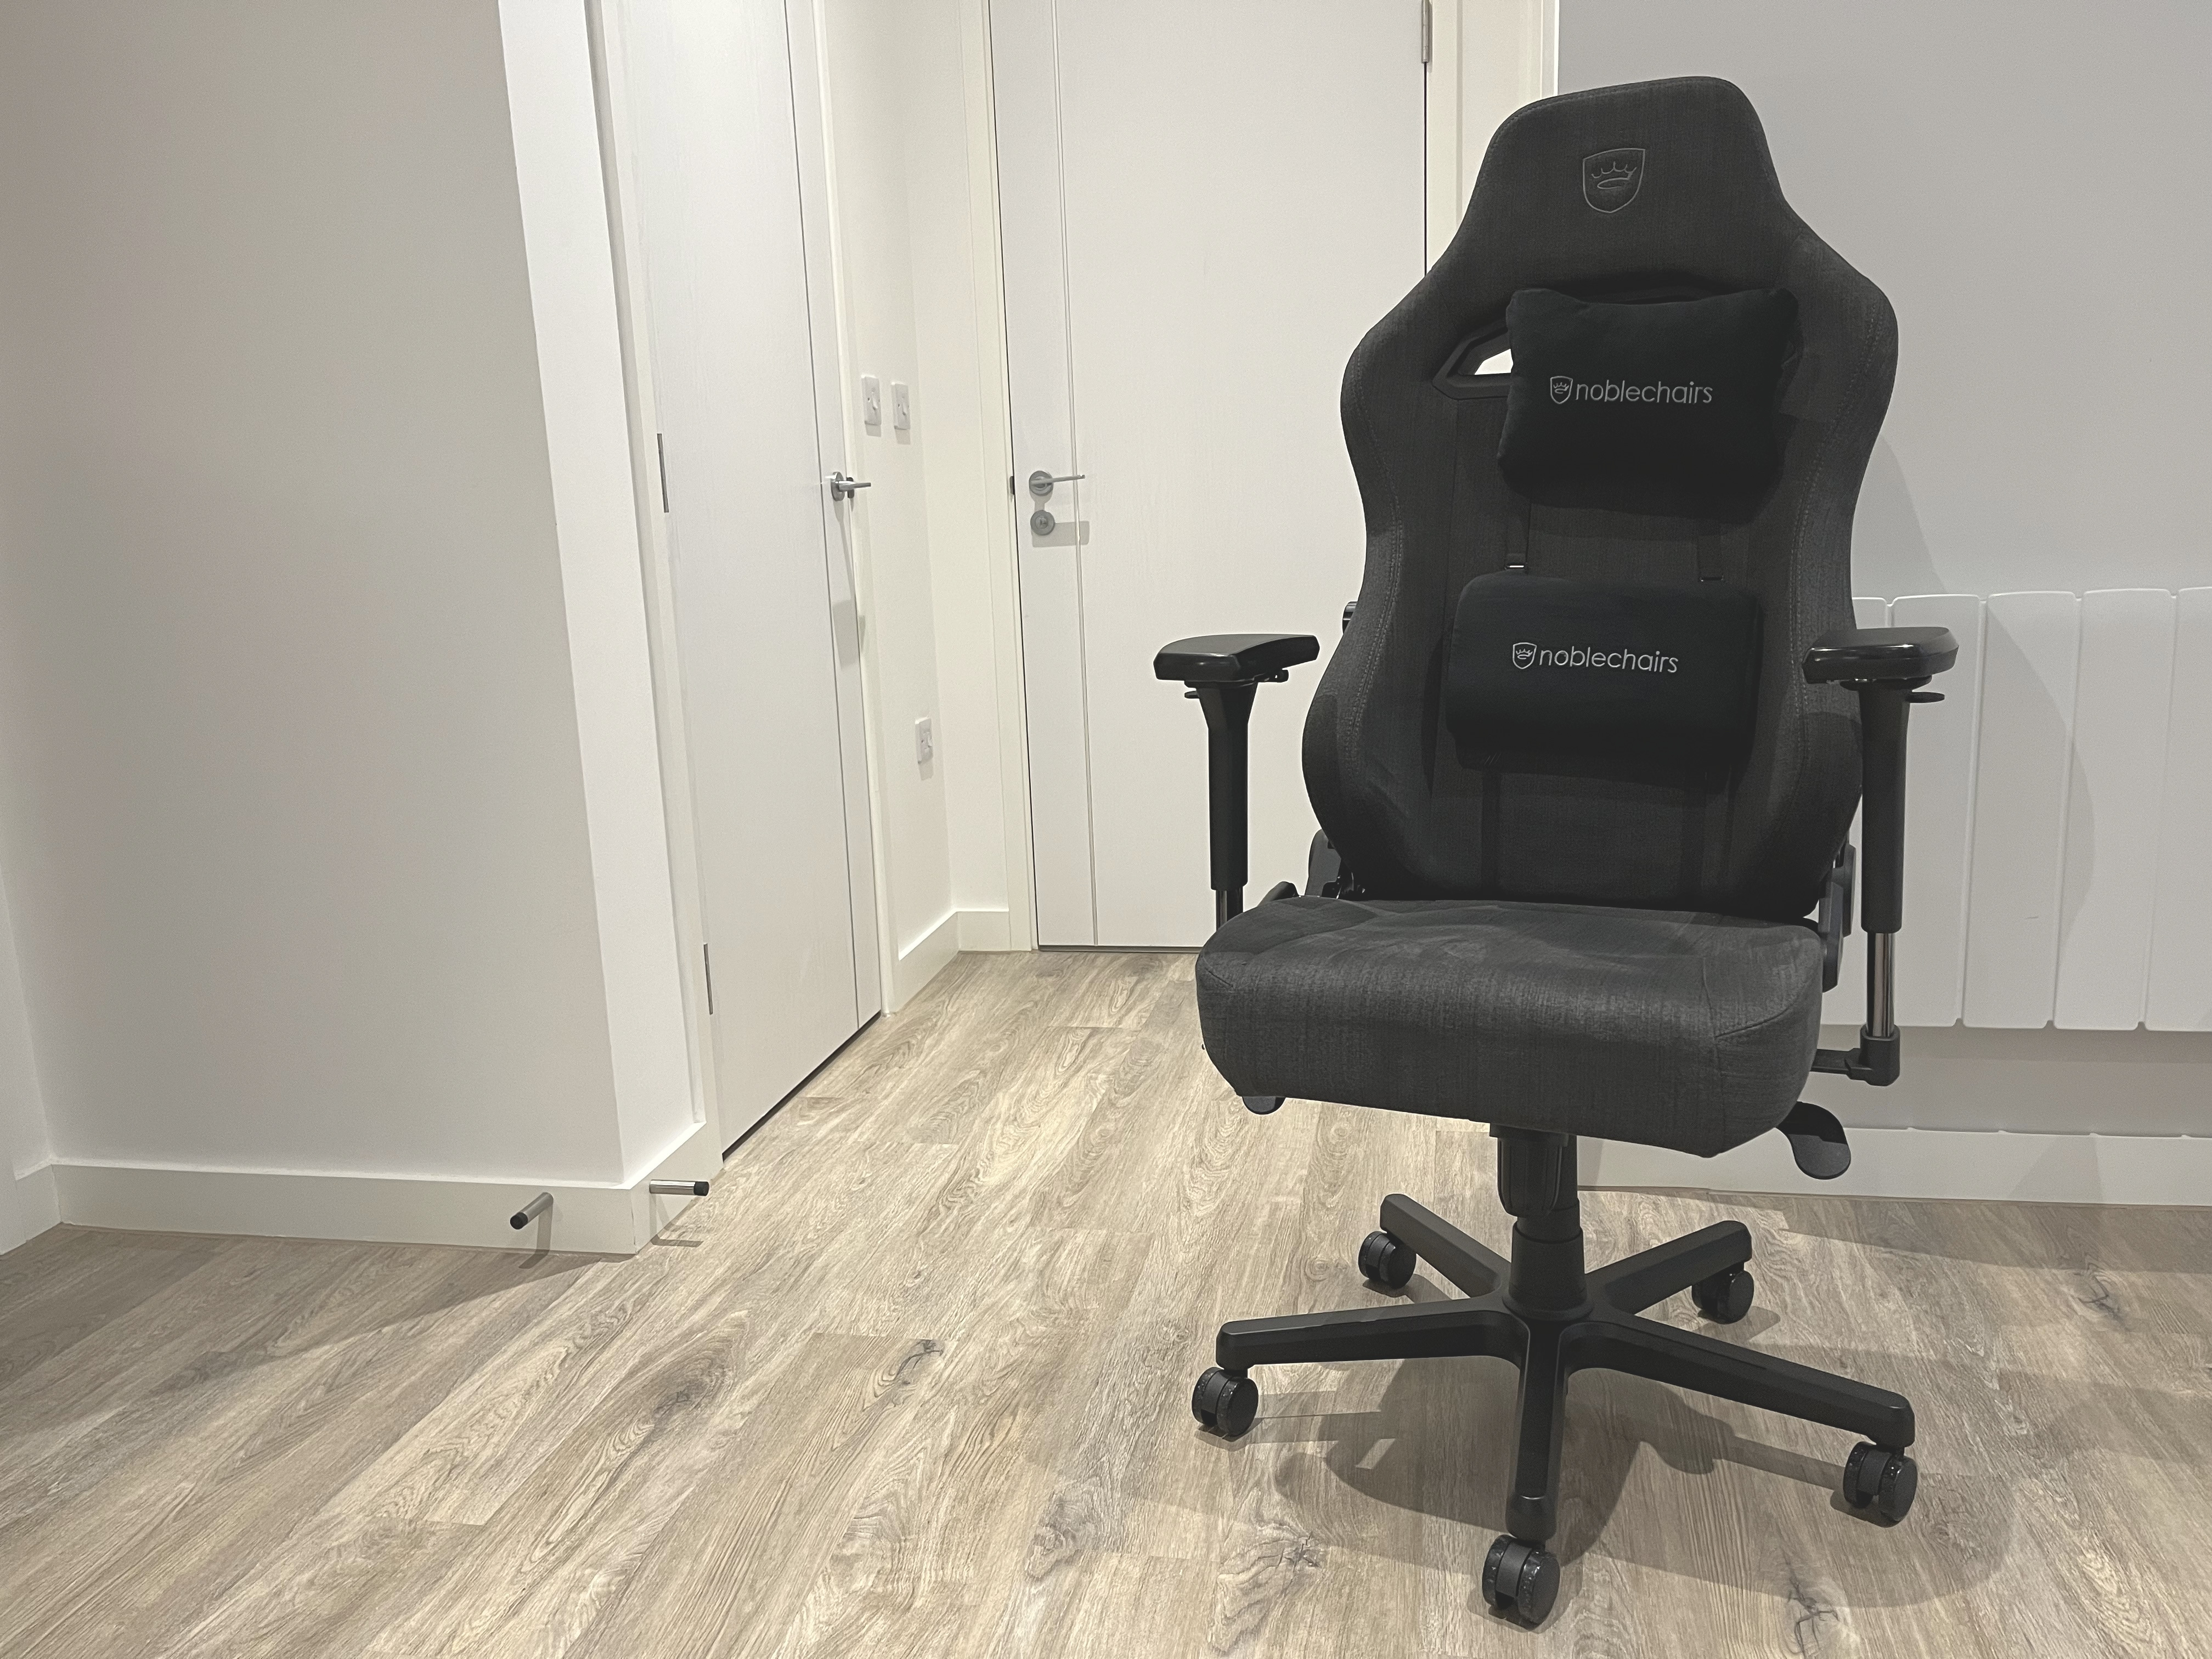 Noblechairs Hero ST TX review: a gaming chair classy enough for the office